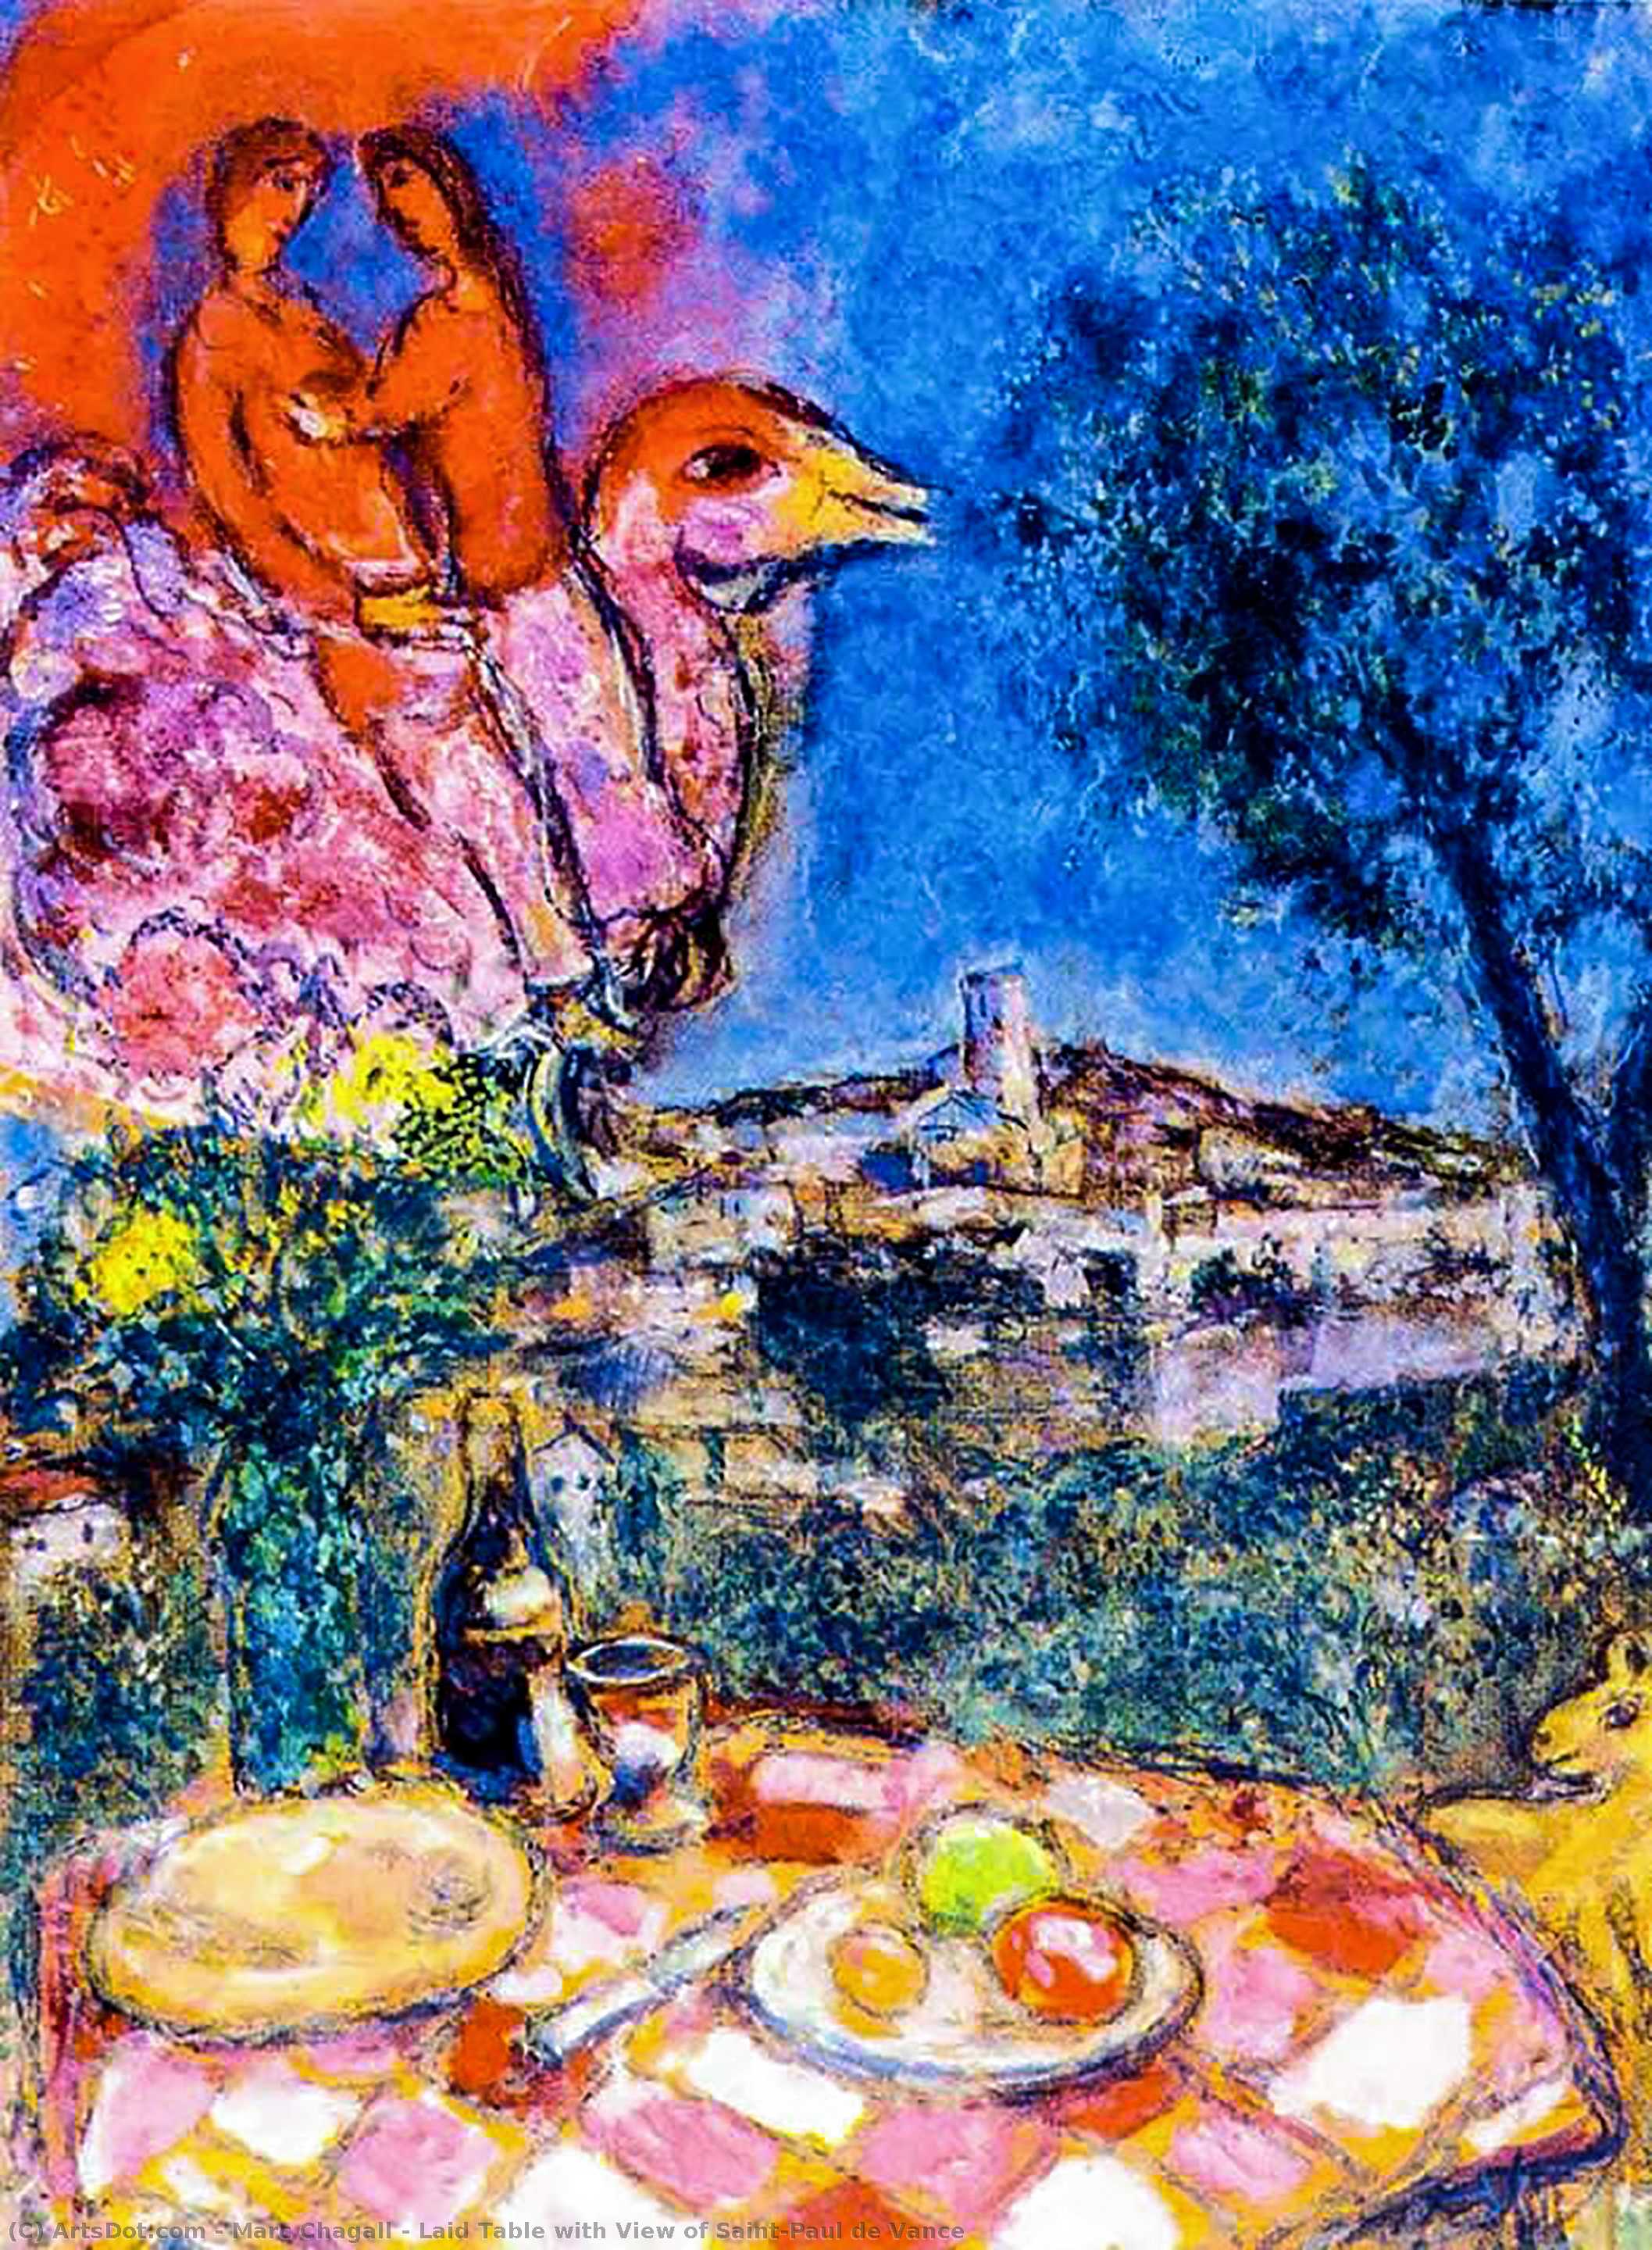 WikiOO.org - 백과 사전 - 회화, 삽화 Marc Chagall - Laid Table with View of Saint-Paul de Vance